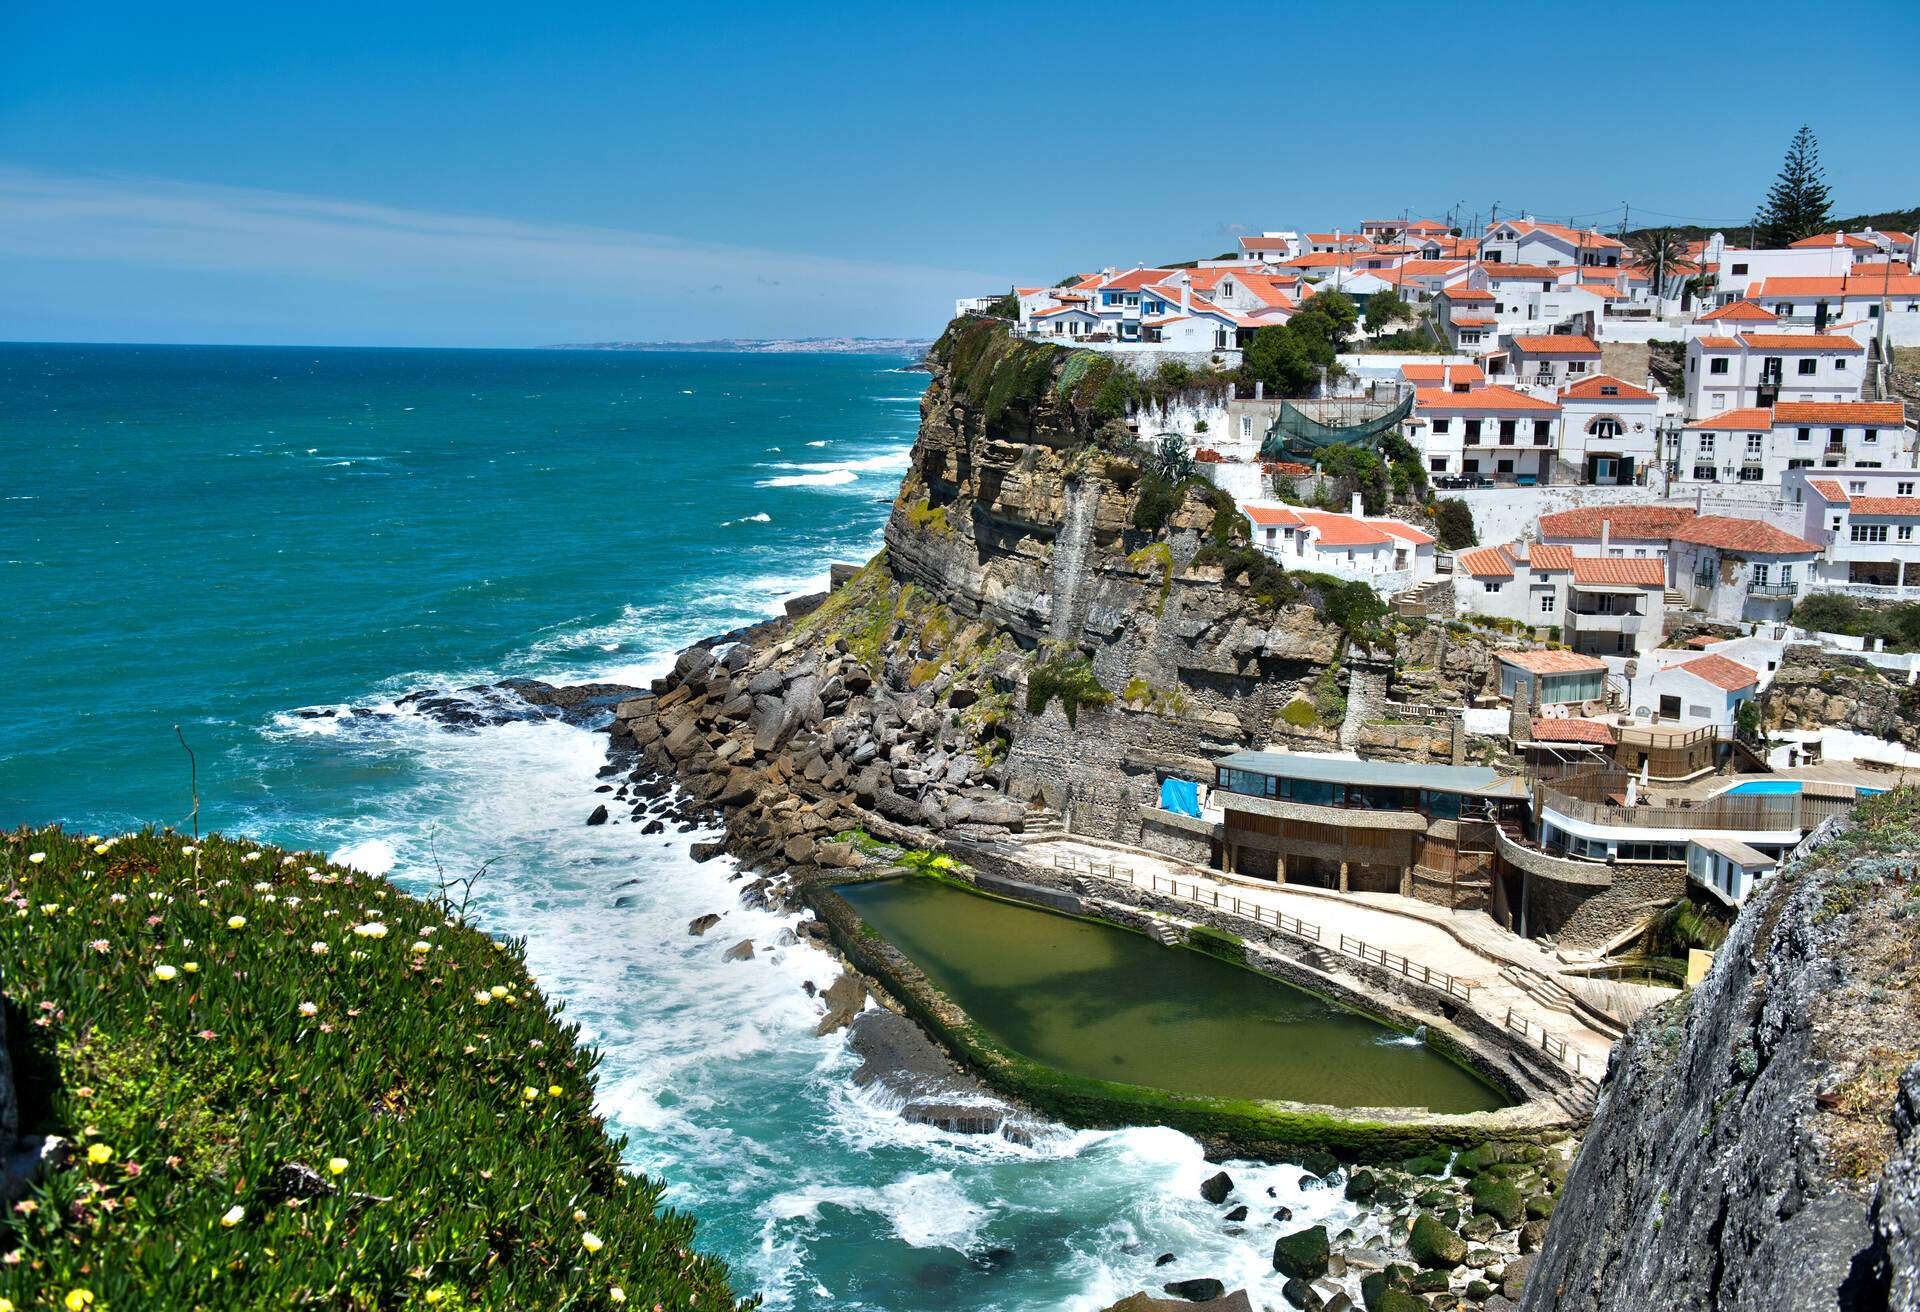 Azenhas do Mar is a seaside town in the municipality of Sintra, Portugal.